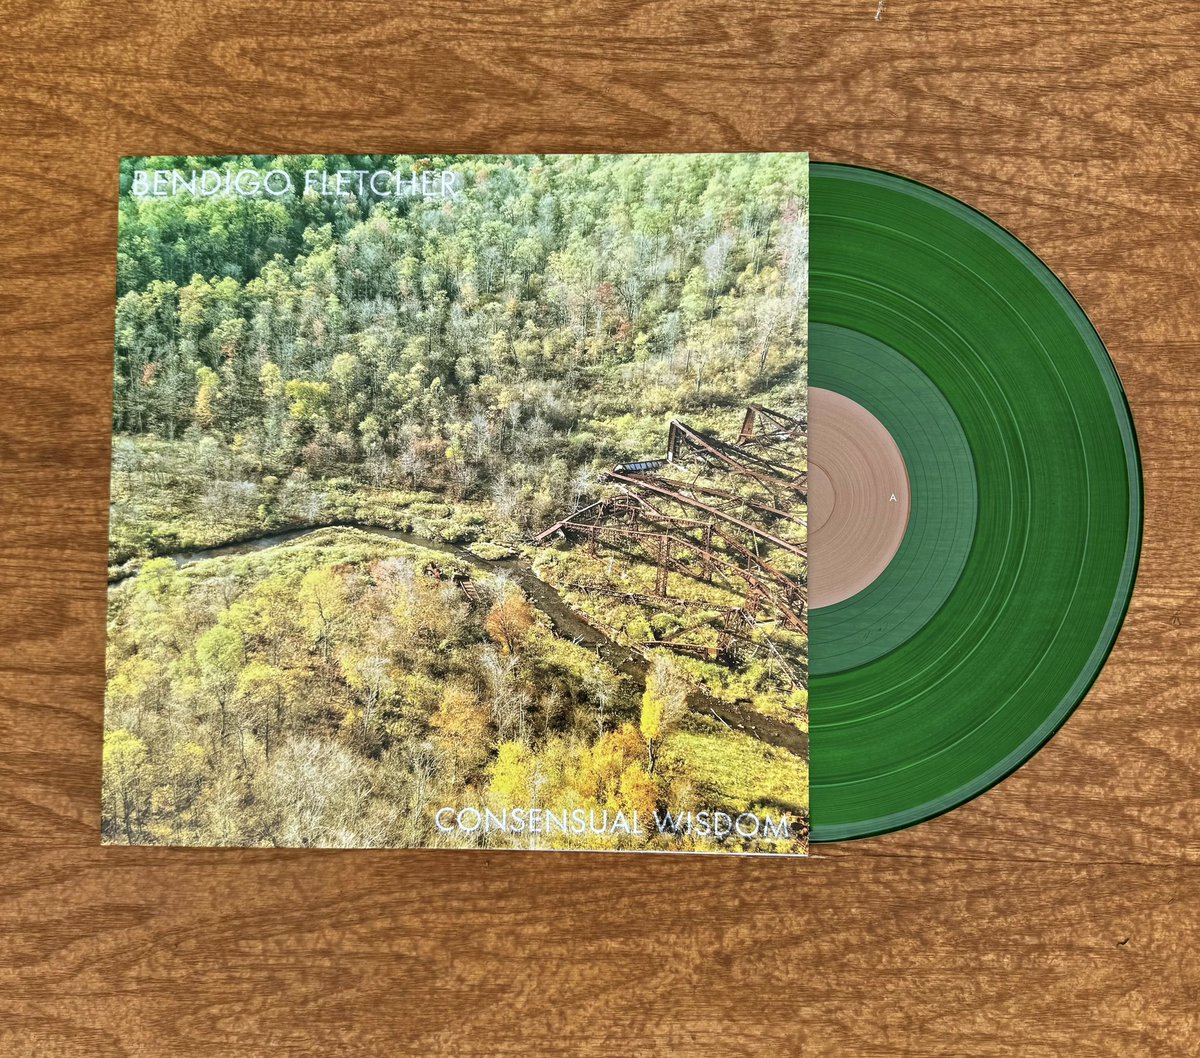 Here is the LTD/100 variant of our SECOND PRESS of @bendigofletcher “Consensual Wisdom” release! We wanted to find a color to pair with the artwork. We are LOVING this glossy grass green color. These should go quick - but the first dibs on 5/4 goes to our SSR Subscribers.